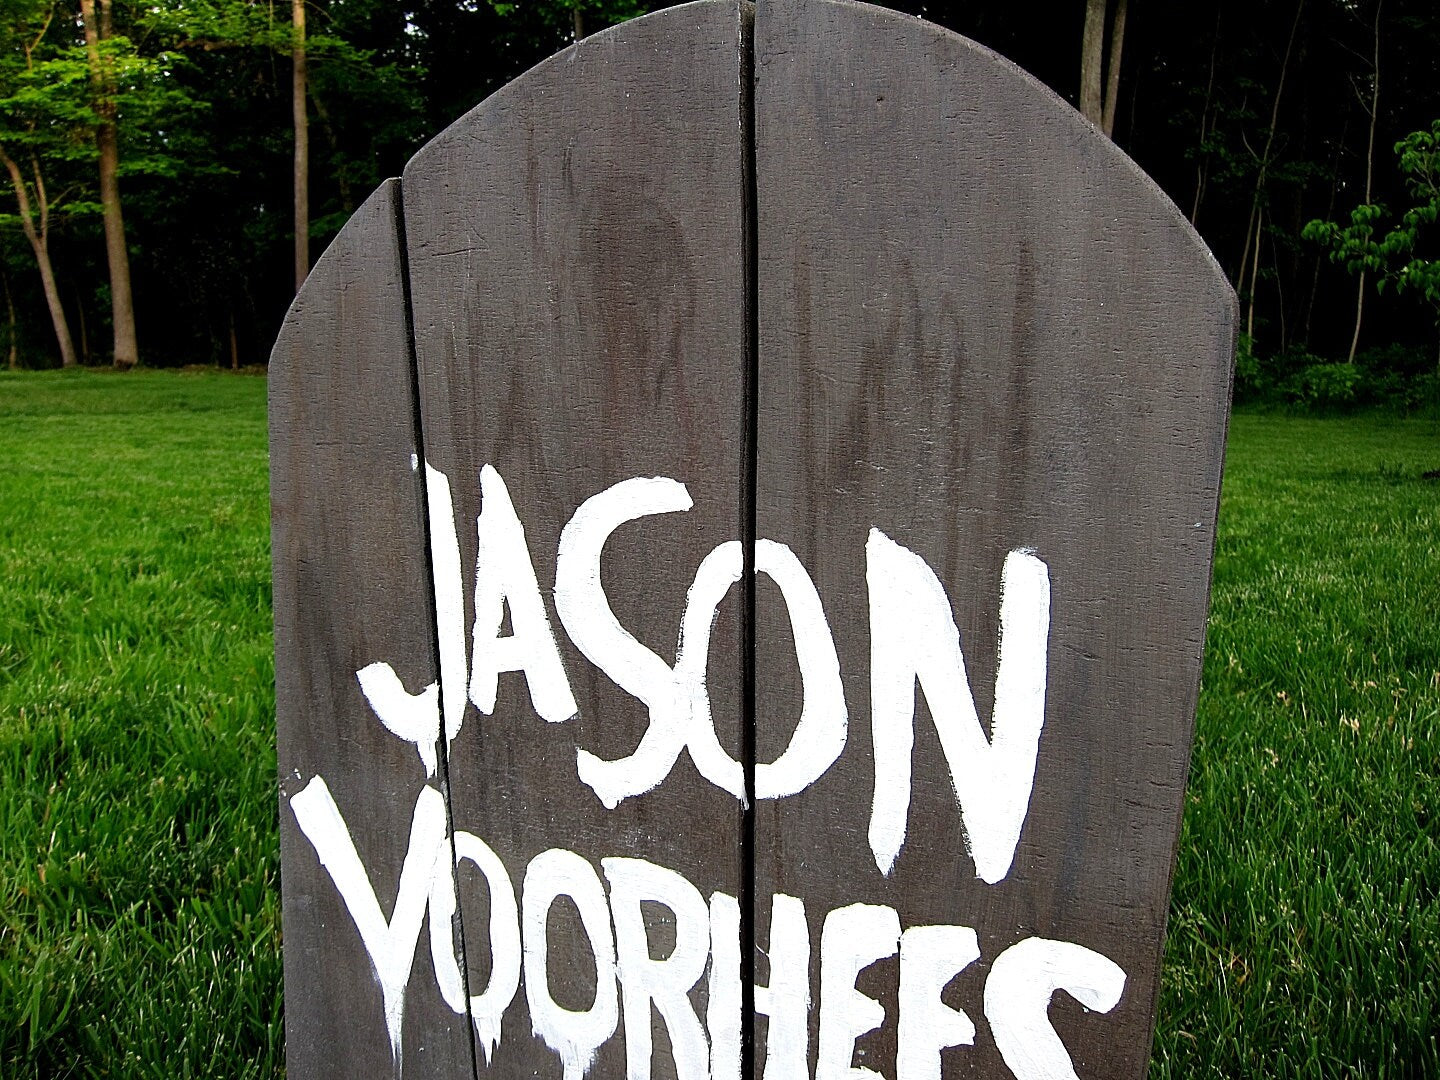 Jason Voorhees Part 5 Friday the 13th Tombstone